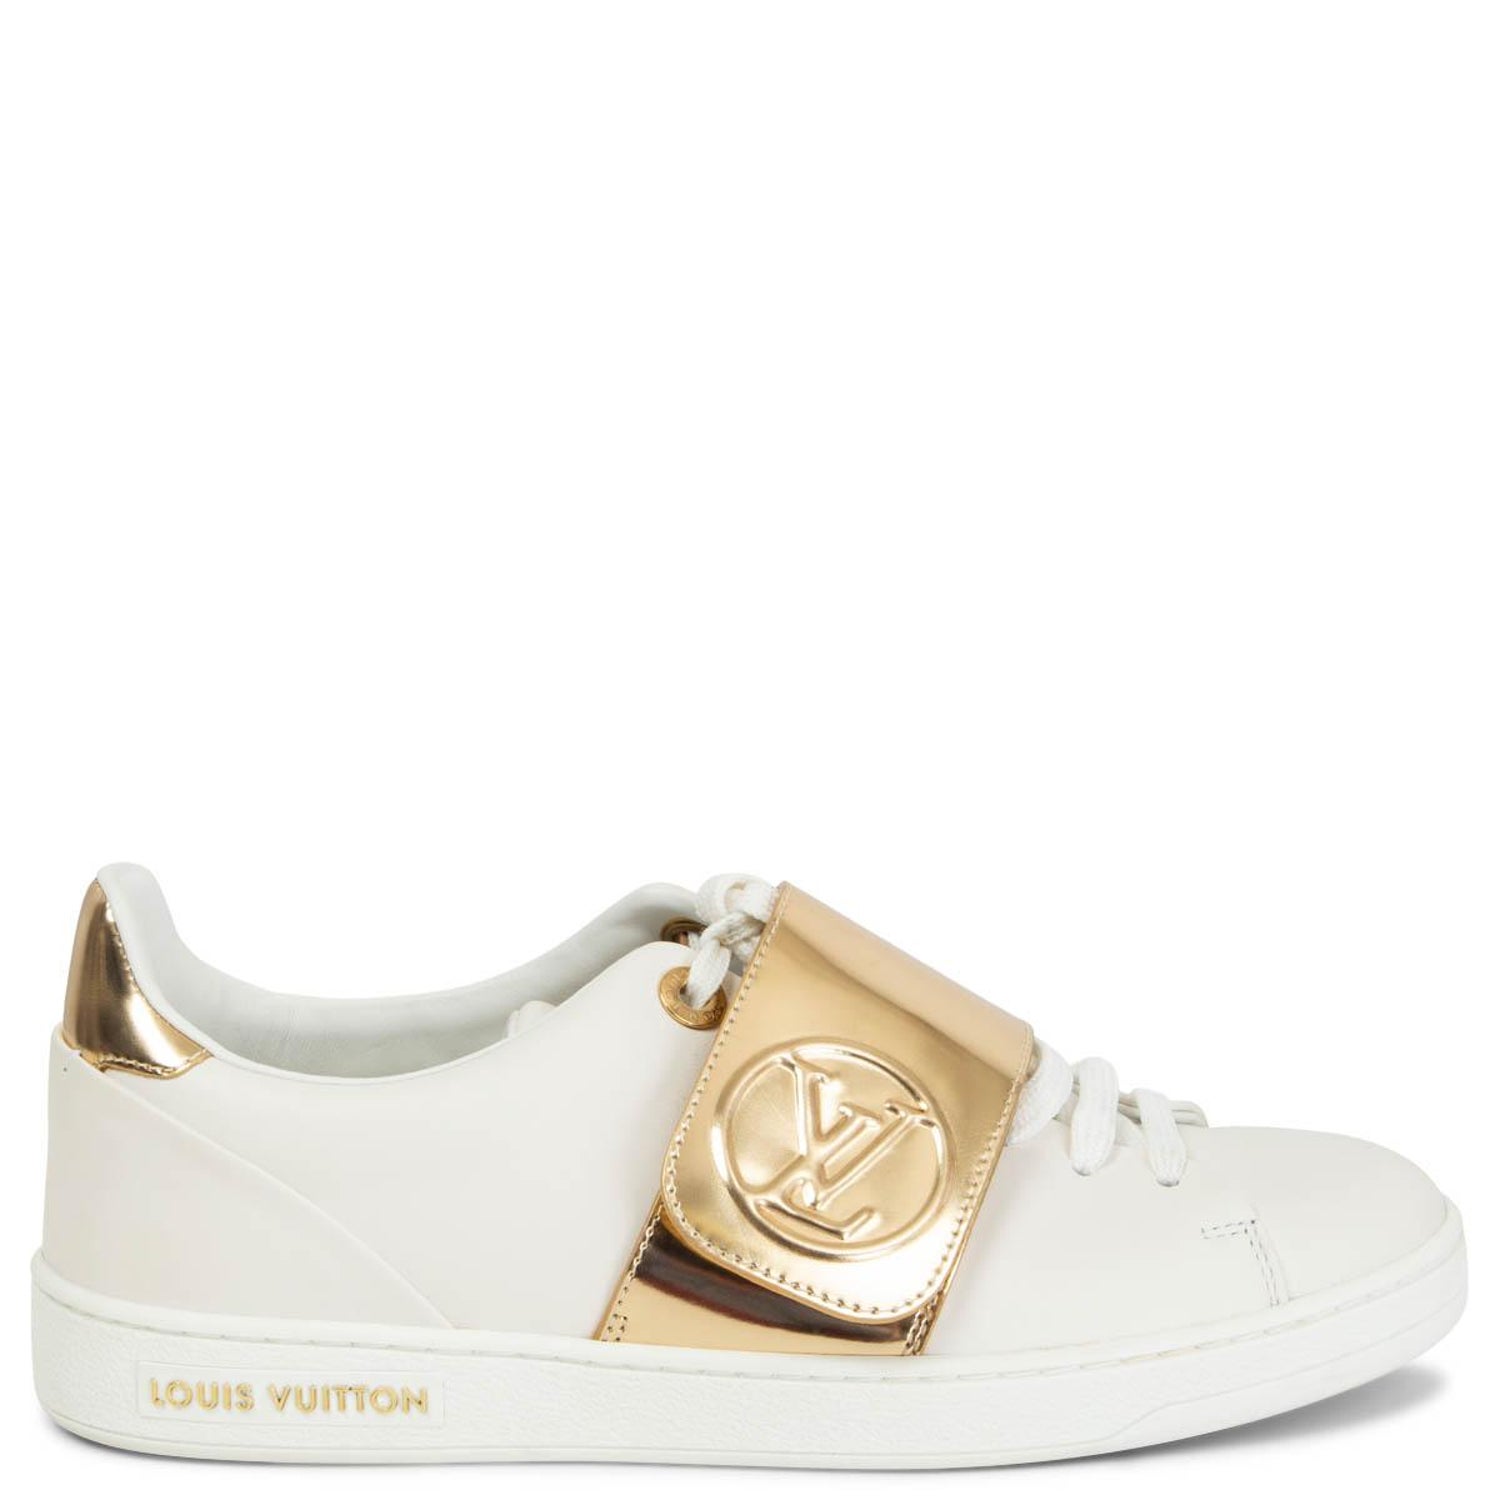 Louis Vuitton - Authenticated Run Away Trainer - Leather White Abstract for Women, Very Good Condition